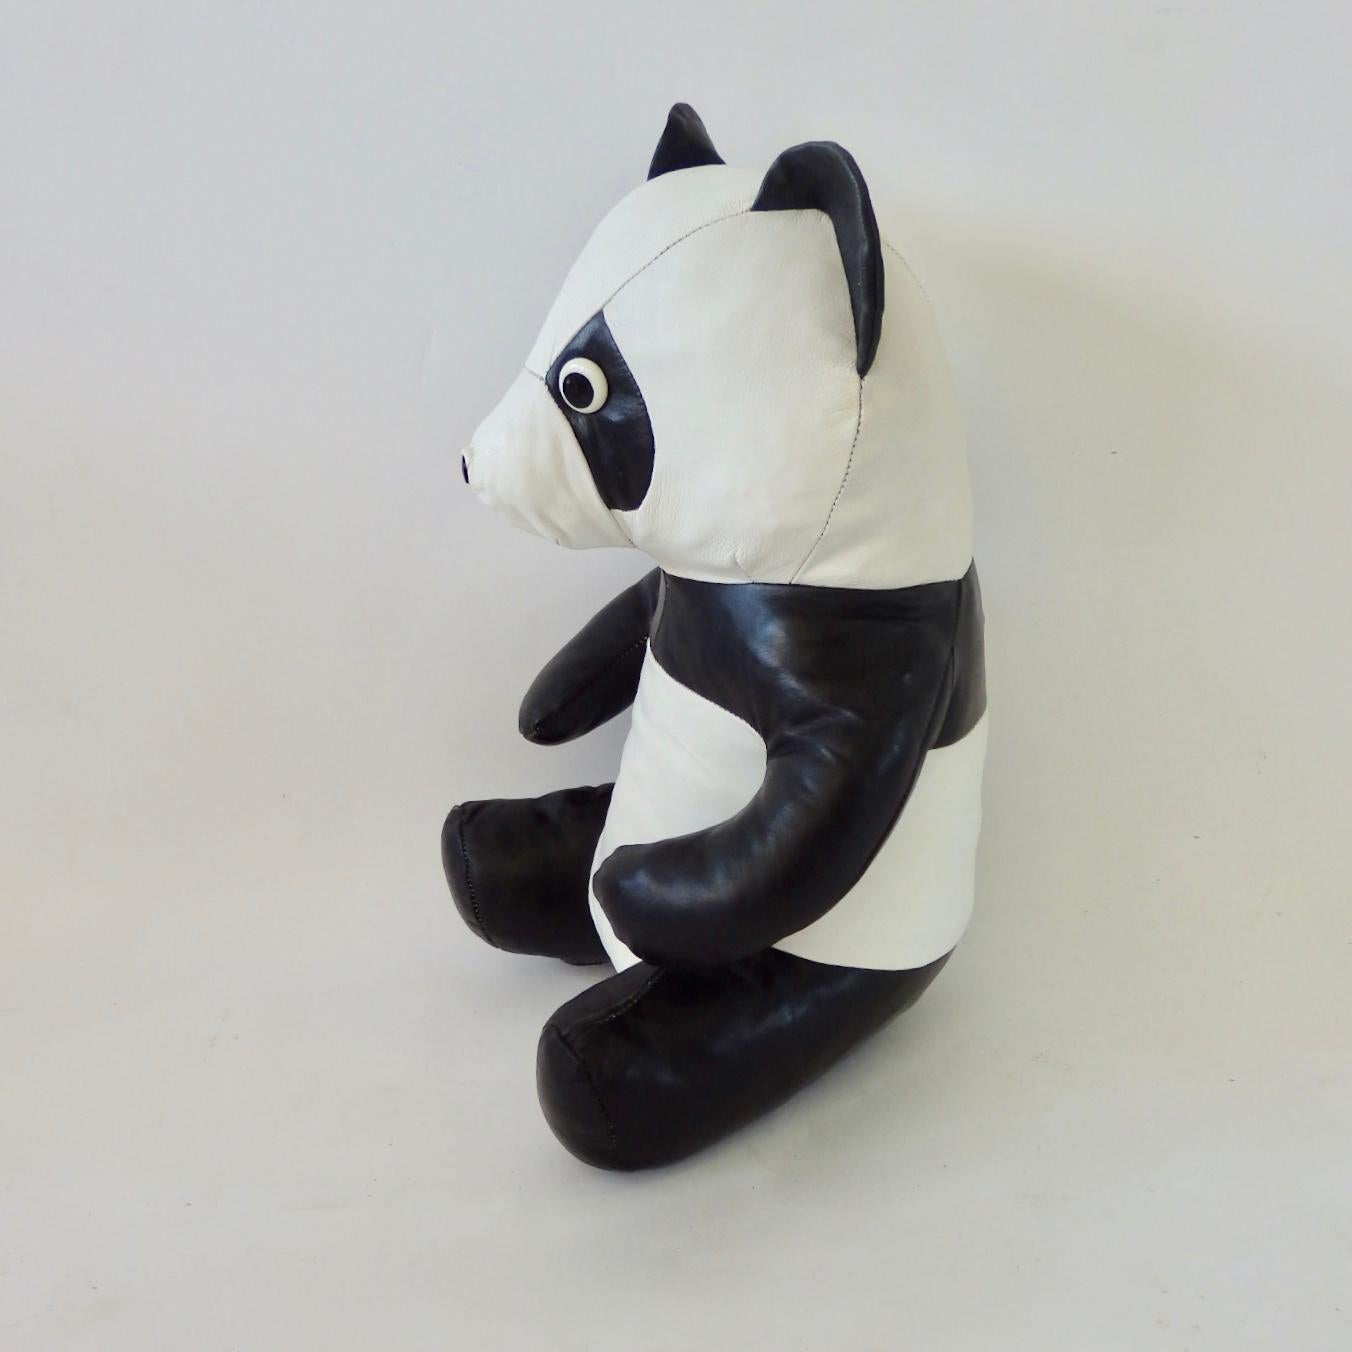 Nicely made black and white leather stuffed panda bear.